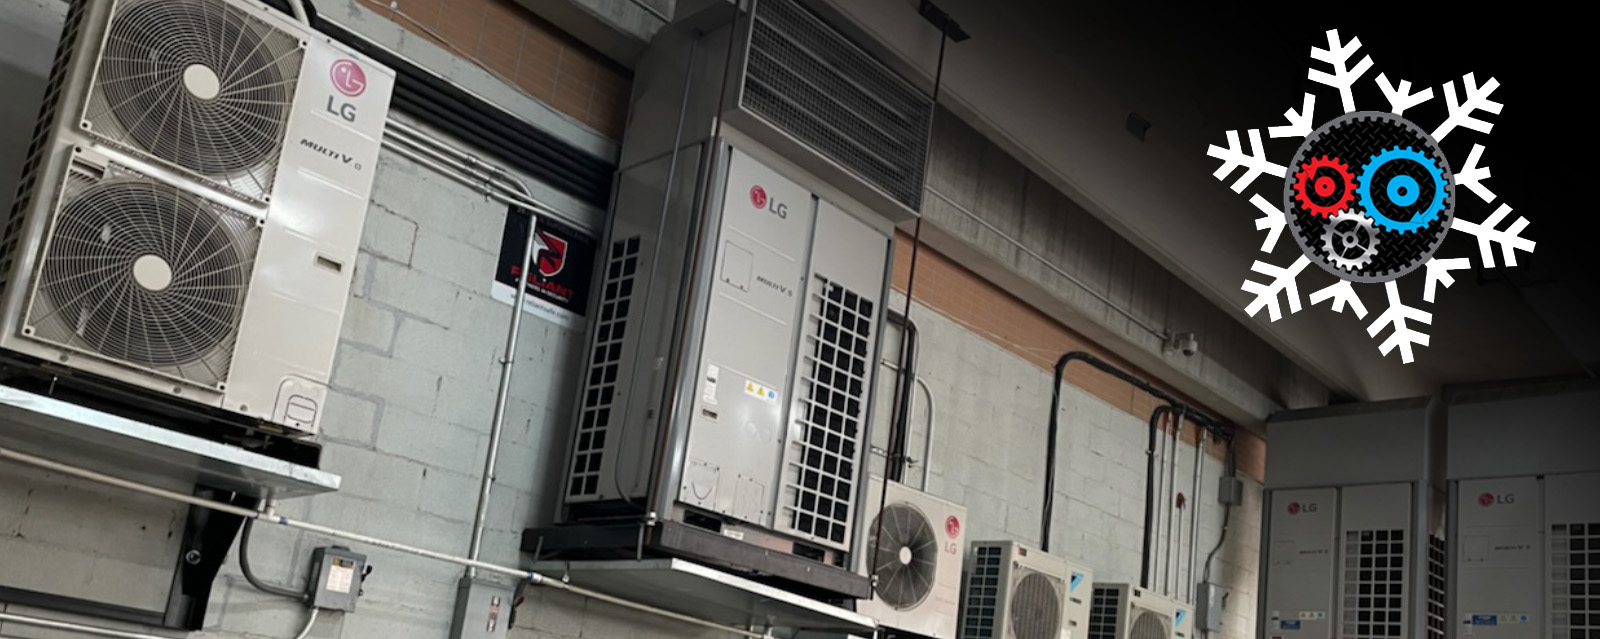 NY Refrigeration & Air Conditioning Inc. | Refrigeration Repair and Air Conditioning Repair| Forest Hills, Queens County and NYC | Phone #: 917.438.8040, Email: NewYorkRefrigeration.AC@gmail.com - Image